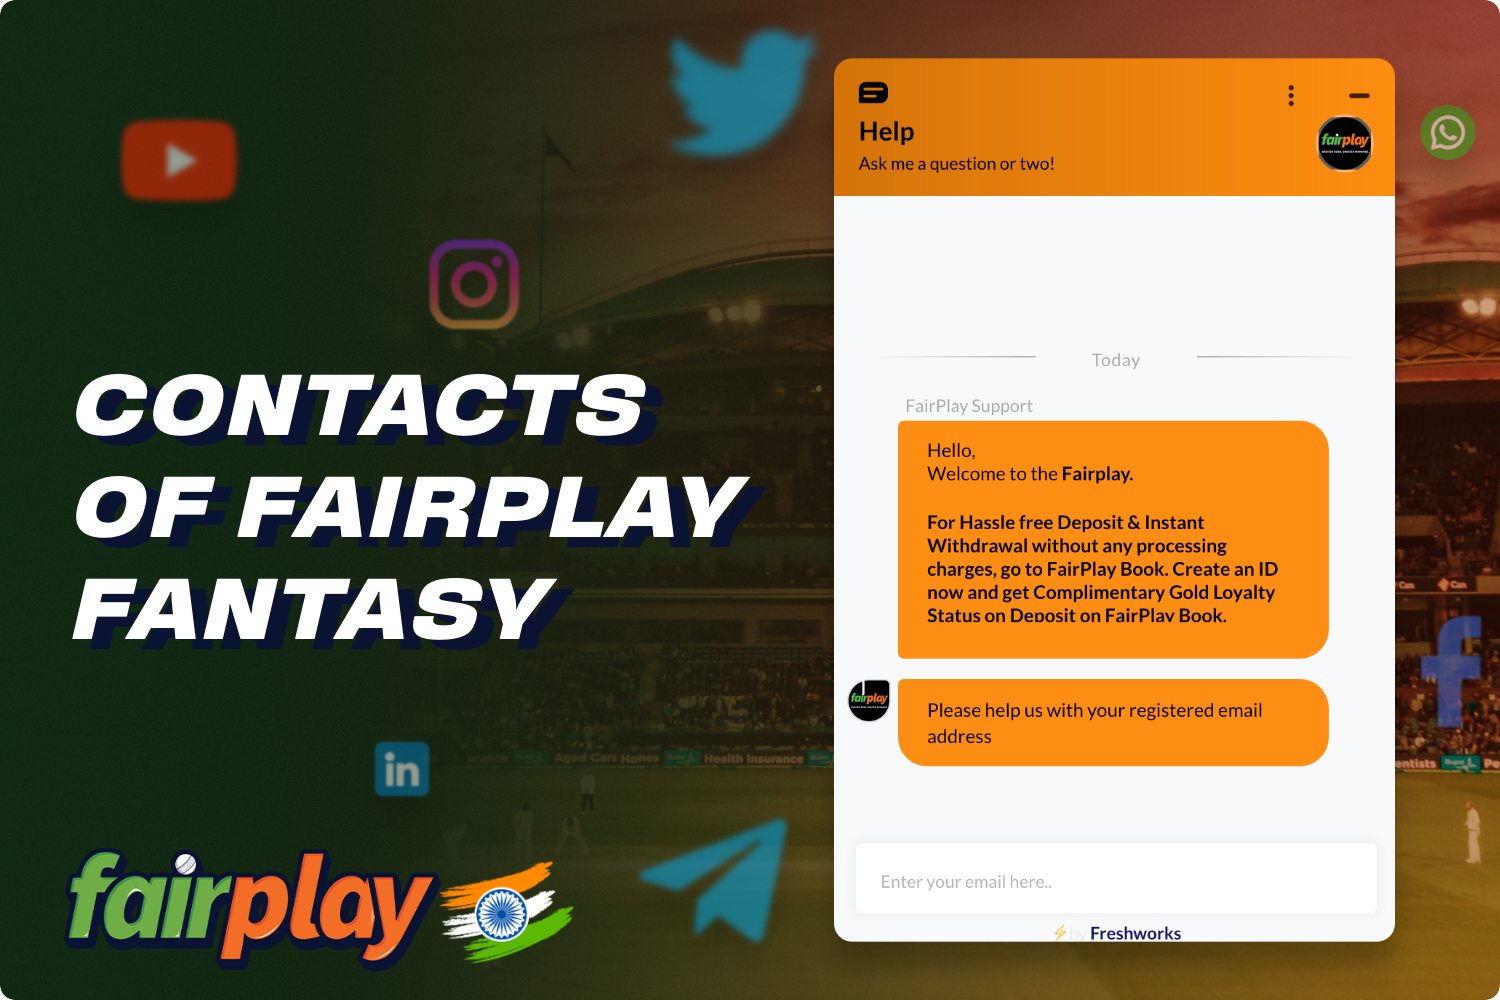 If any questions arise, Fairplay Fantasy users from India can get answers by contacting the platform's support team